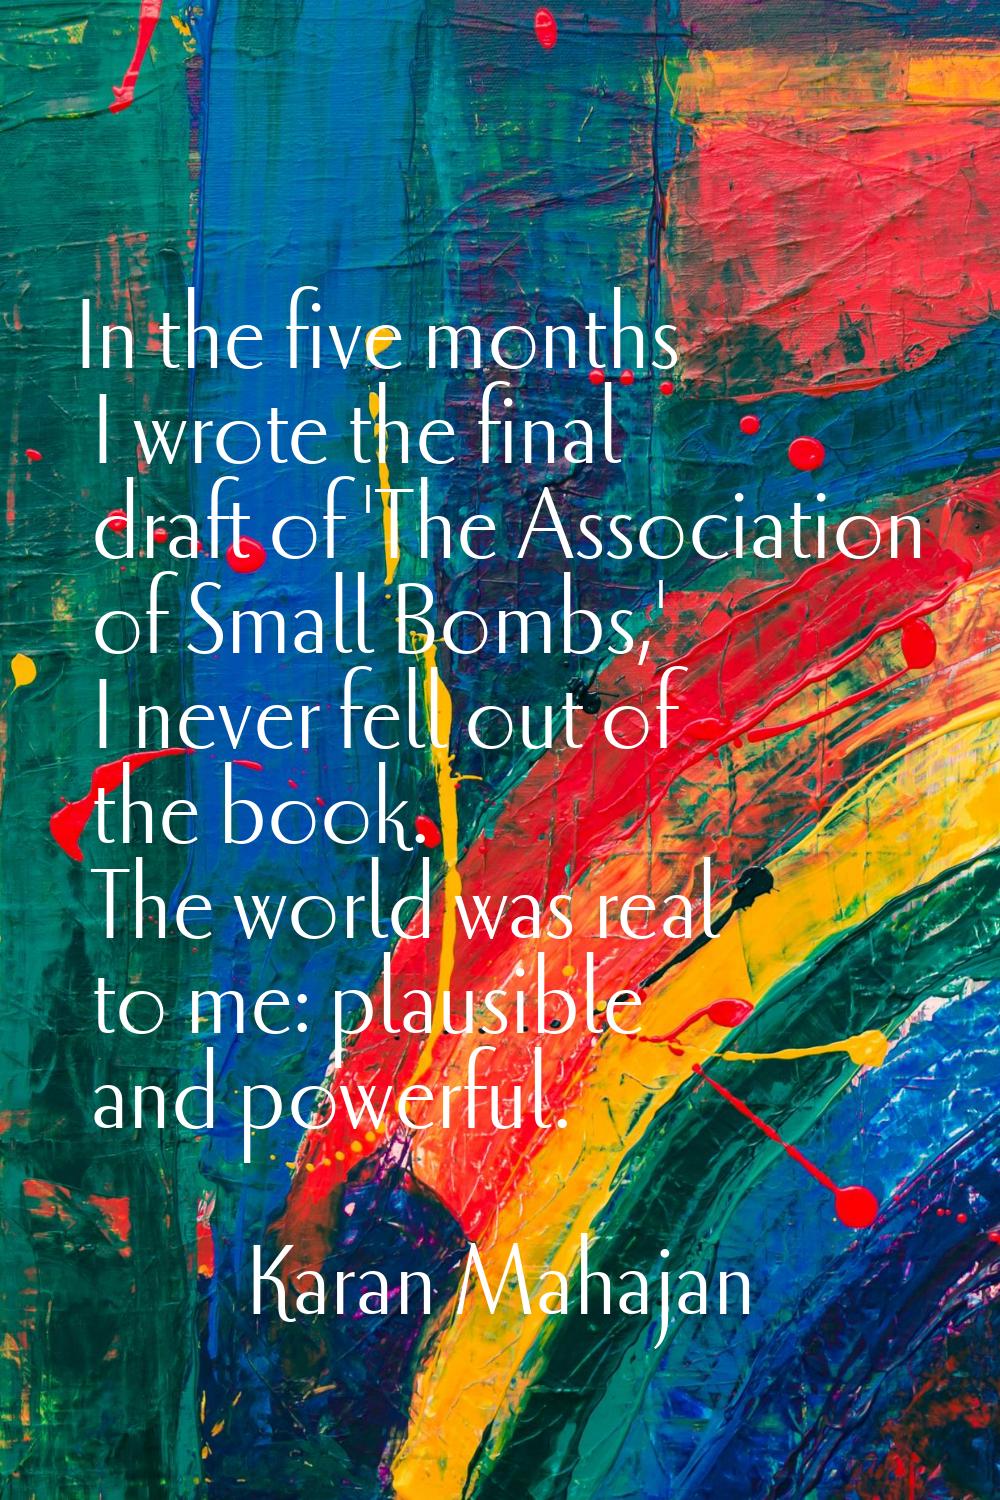 In the five months I wrote the final draft of 'The Association of Small Bombs,' I never fell out of